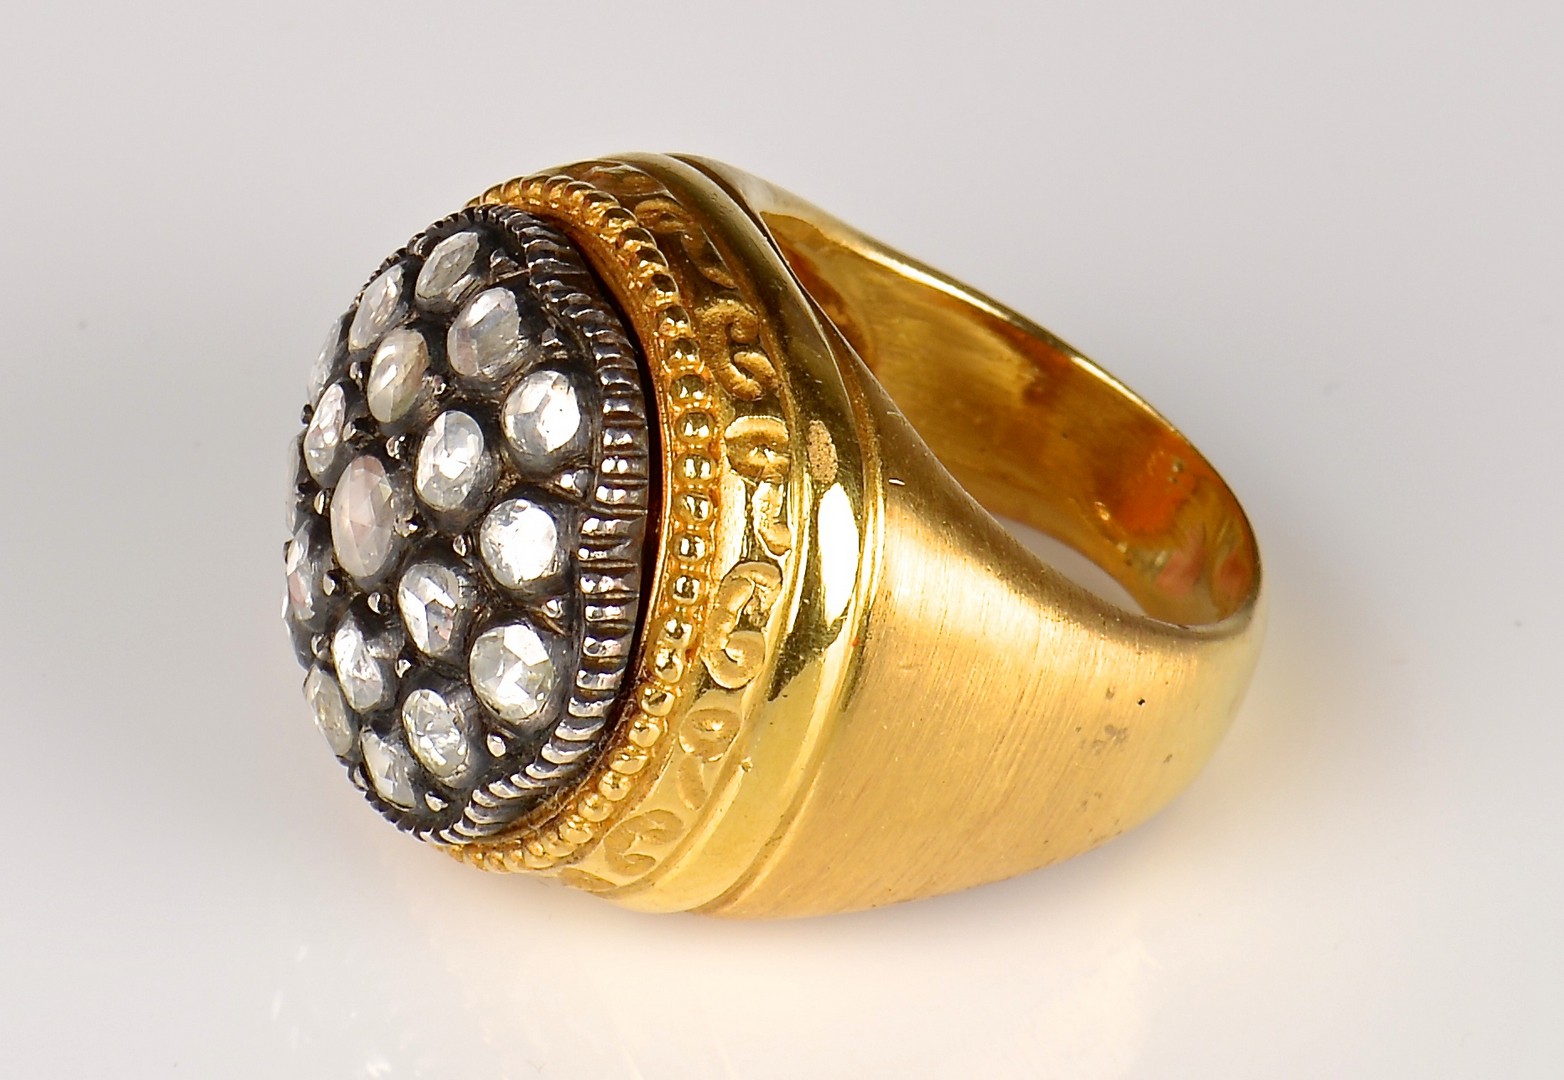 Lot 63: 22K Etruscan style Ring with Rose Cut Diamonds